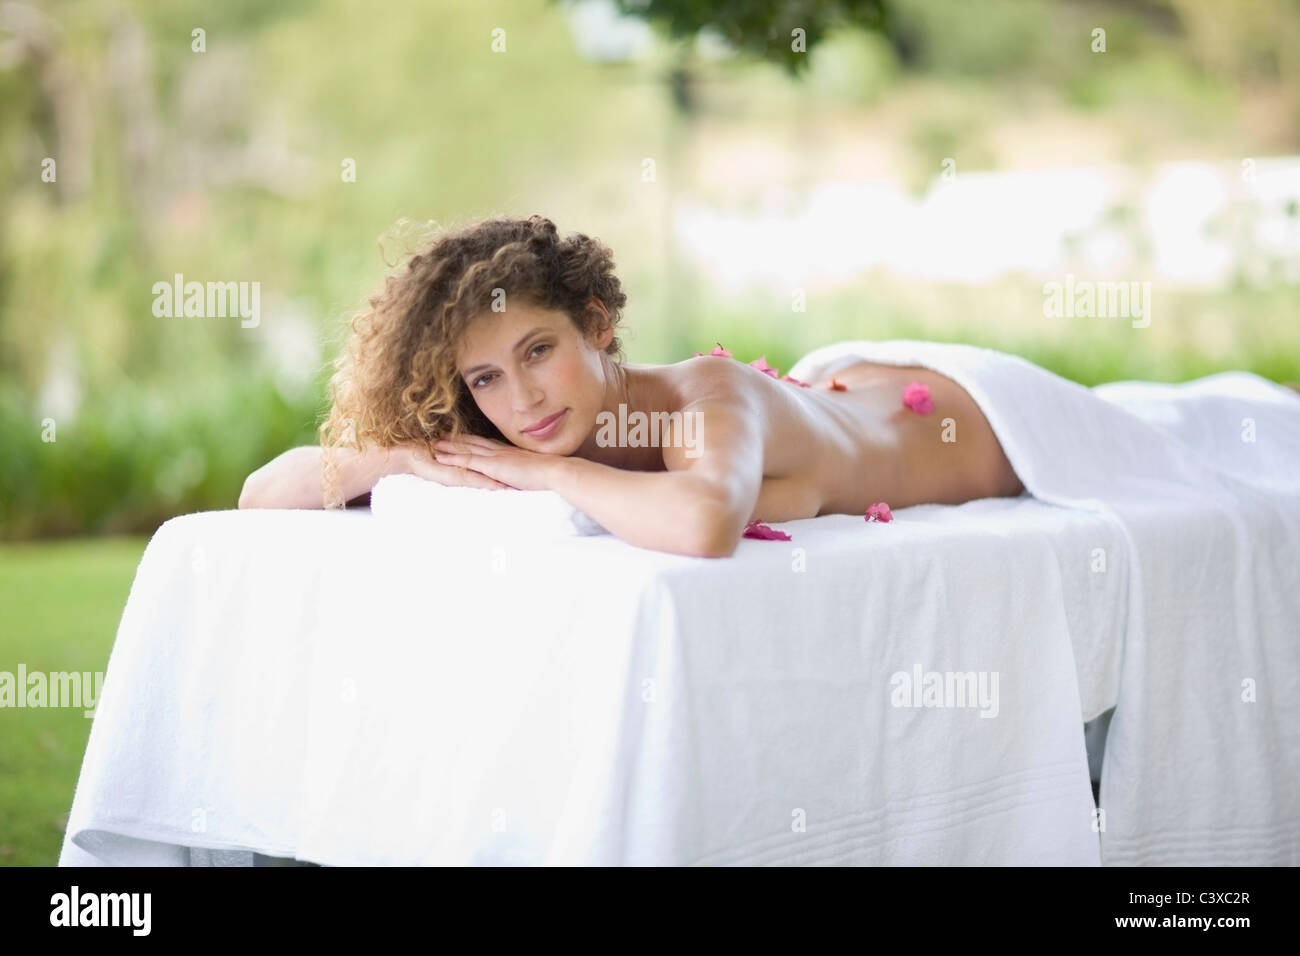 Woman on massage table Banque D'Images